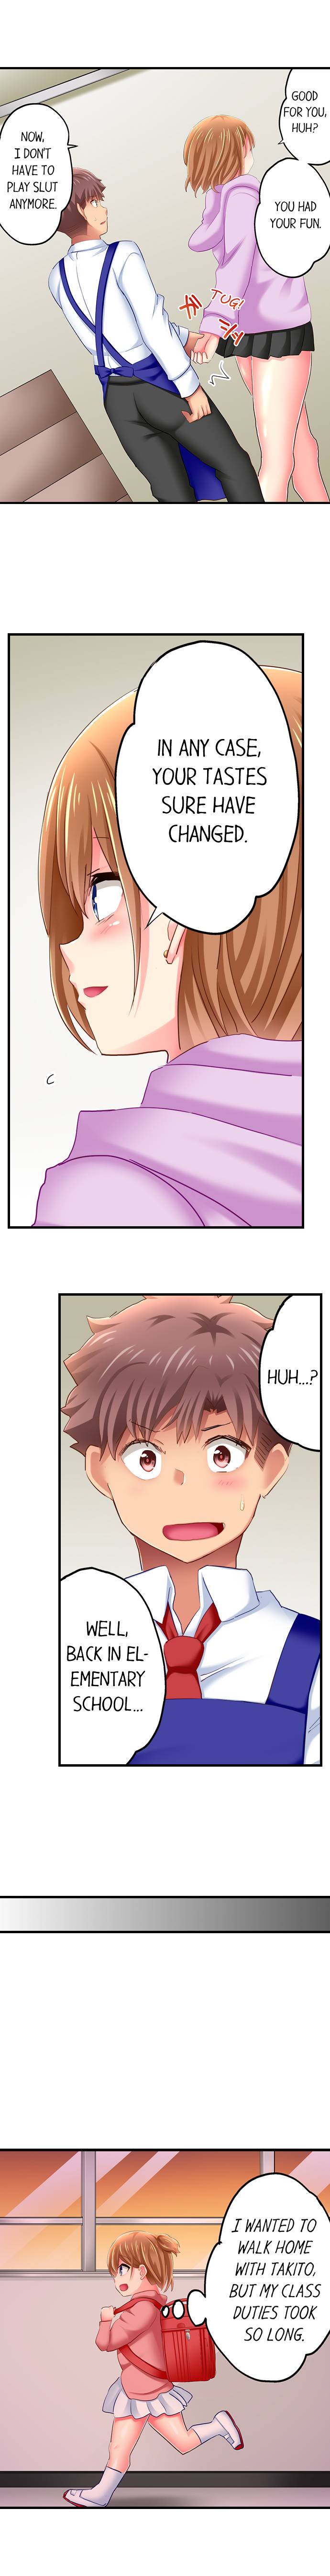 Sex in the Adult Toys Section - Chapter 7 Page 7